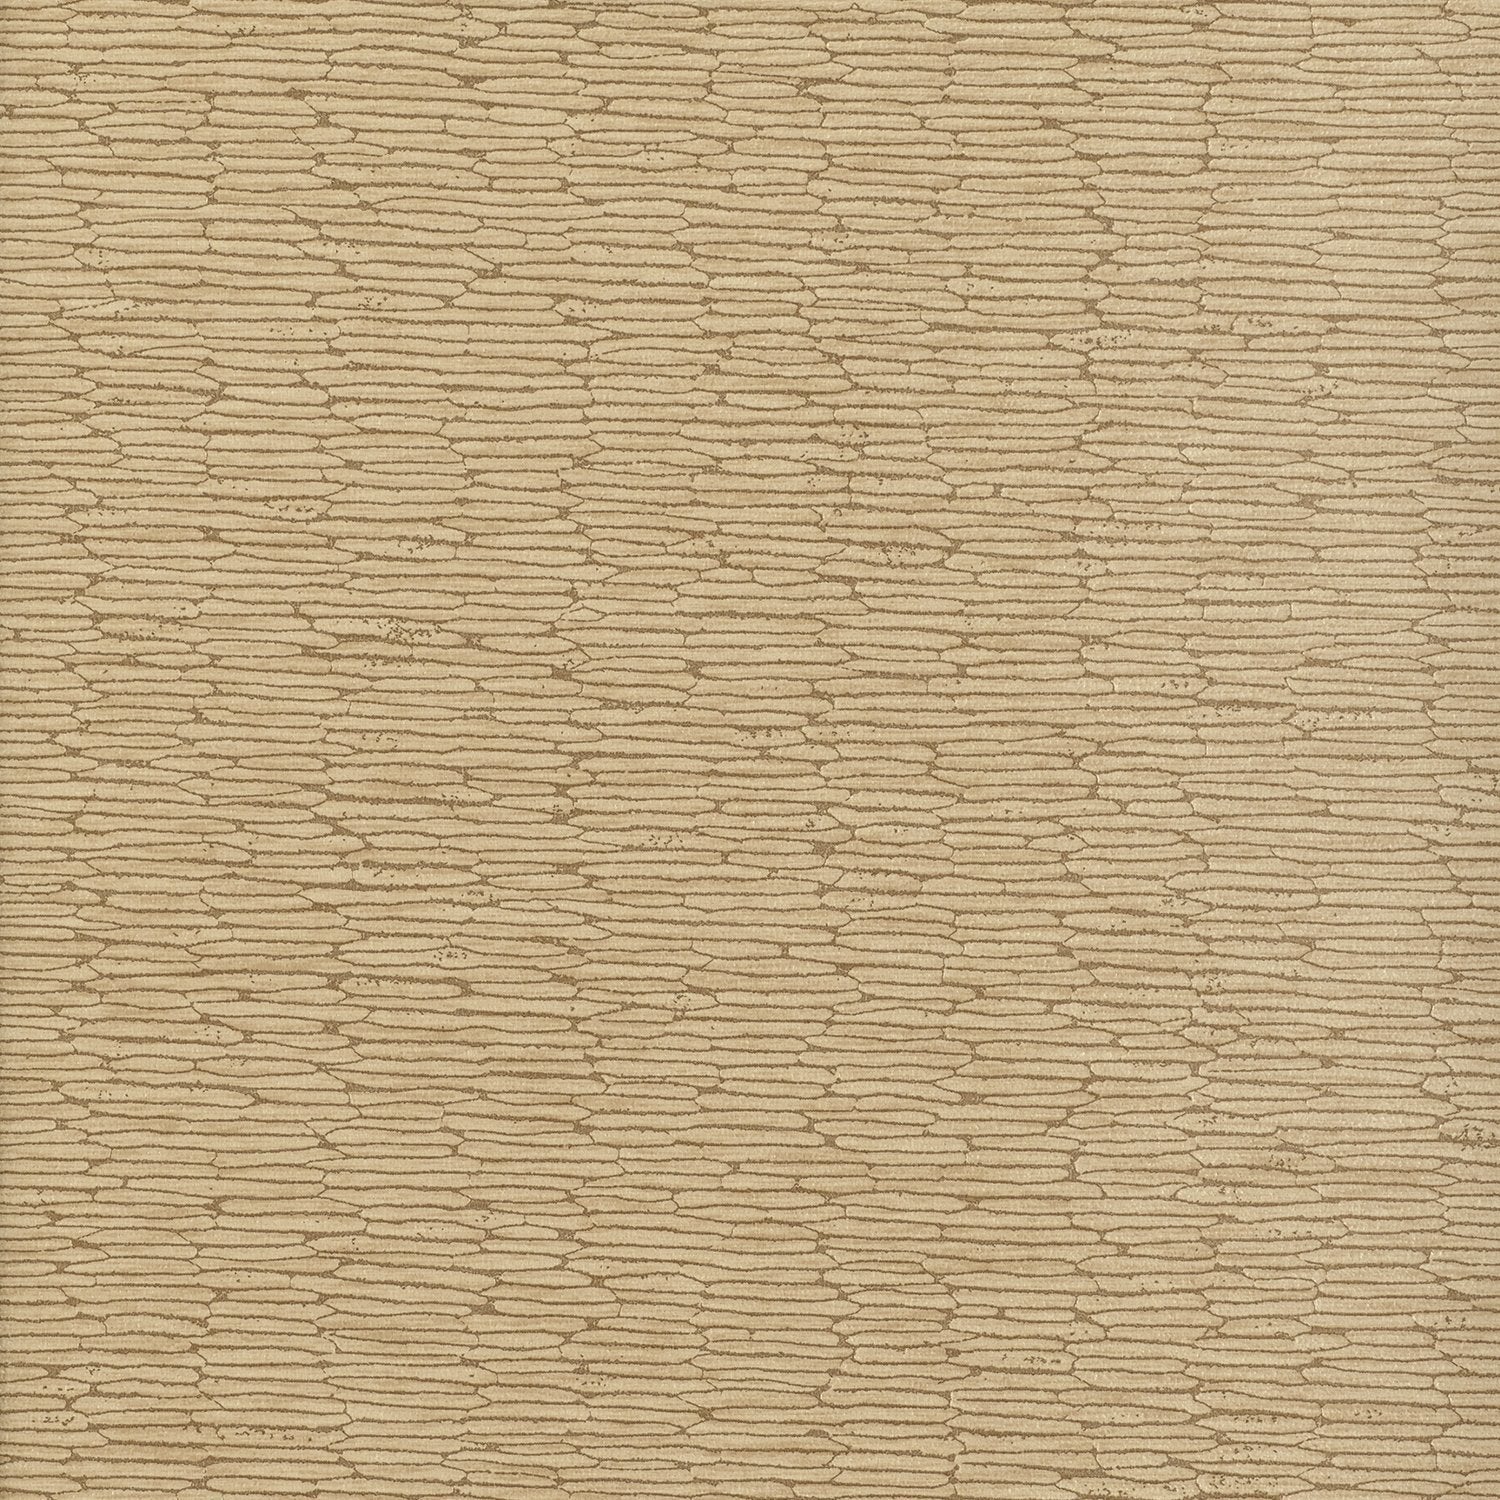 Chipper - Y46855 - Wallcovering - Vycon - Kube Contract